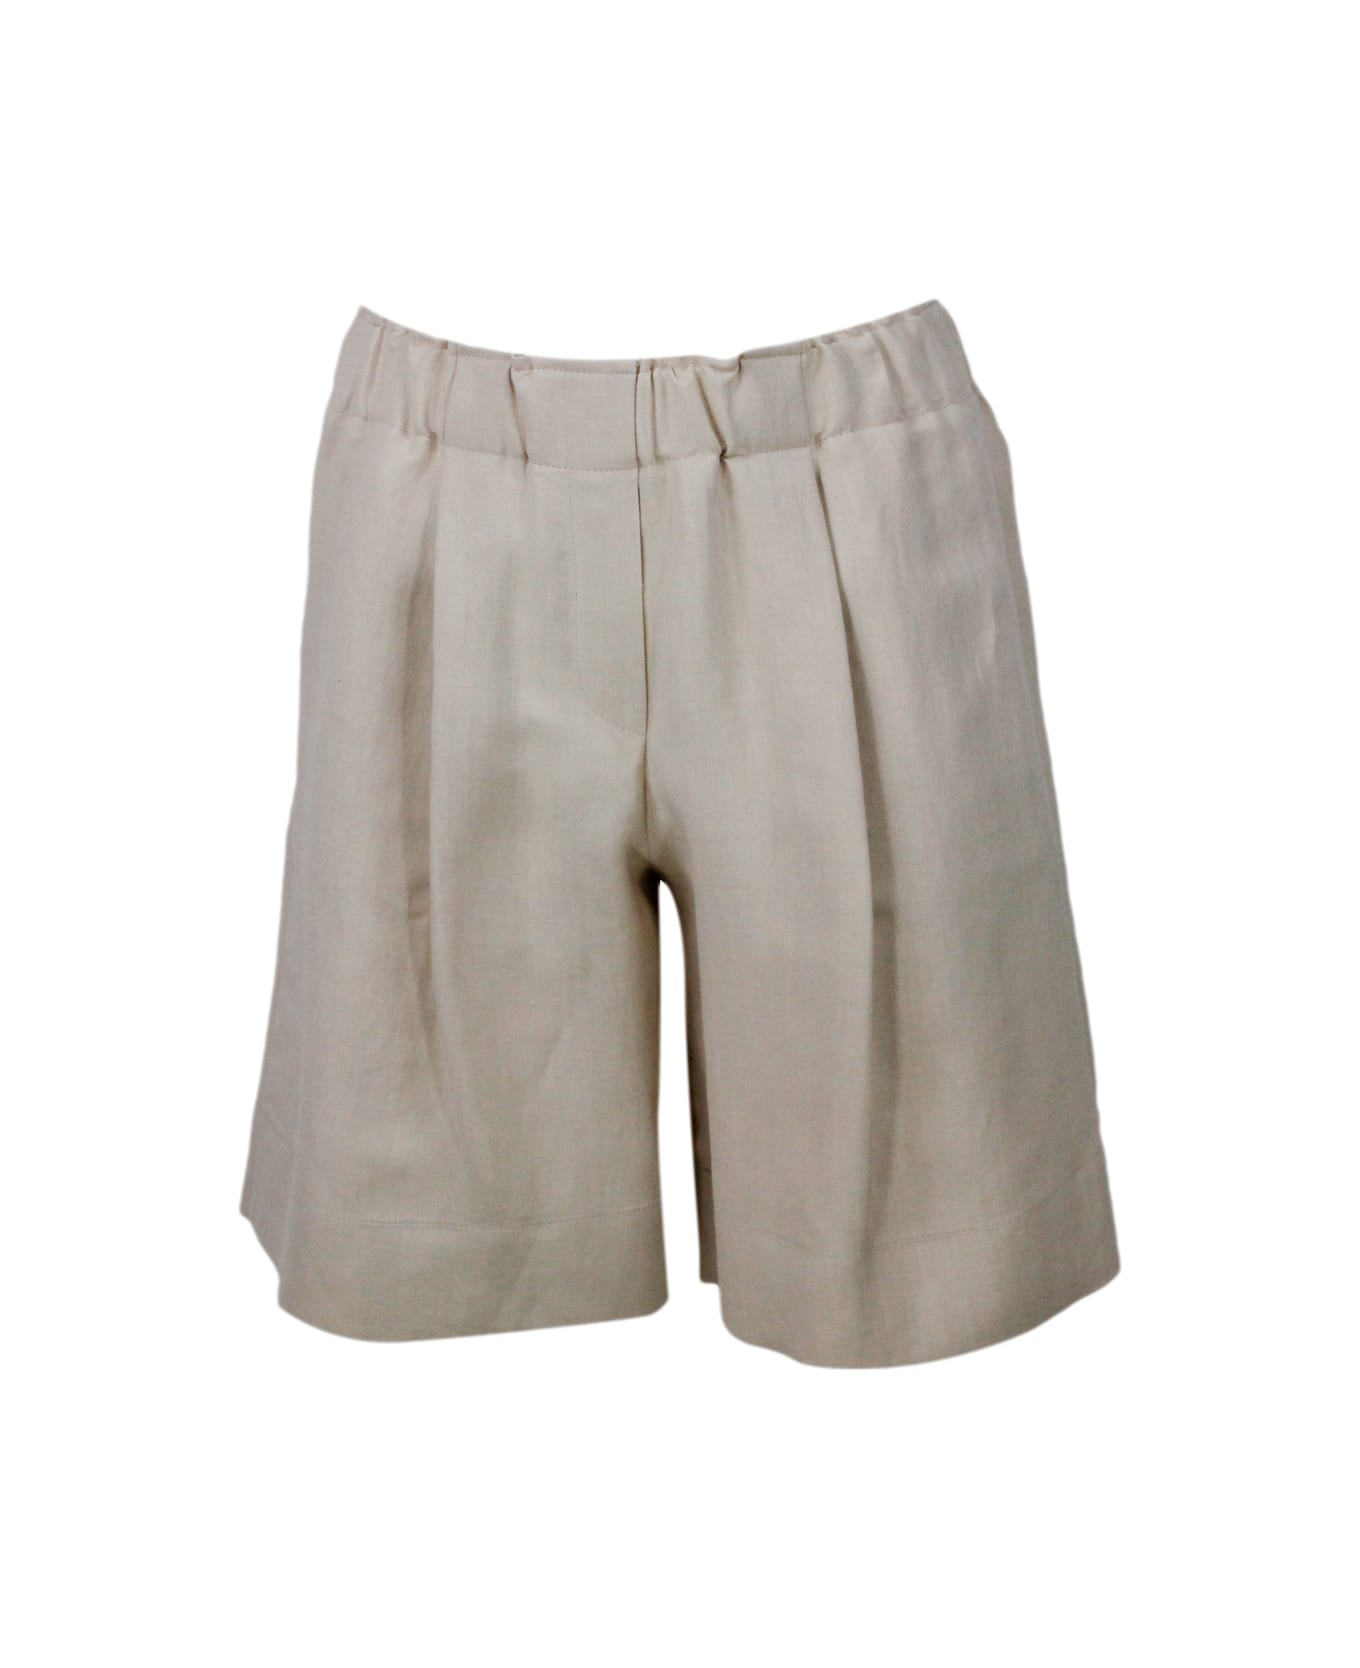 Antonelli Knee-length Bermuda Shorts In Linen Blend With Small Darts And Elasticated Waist - Beige